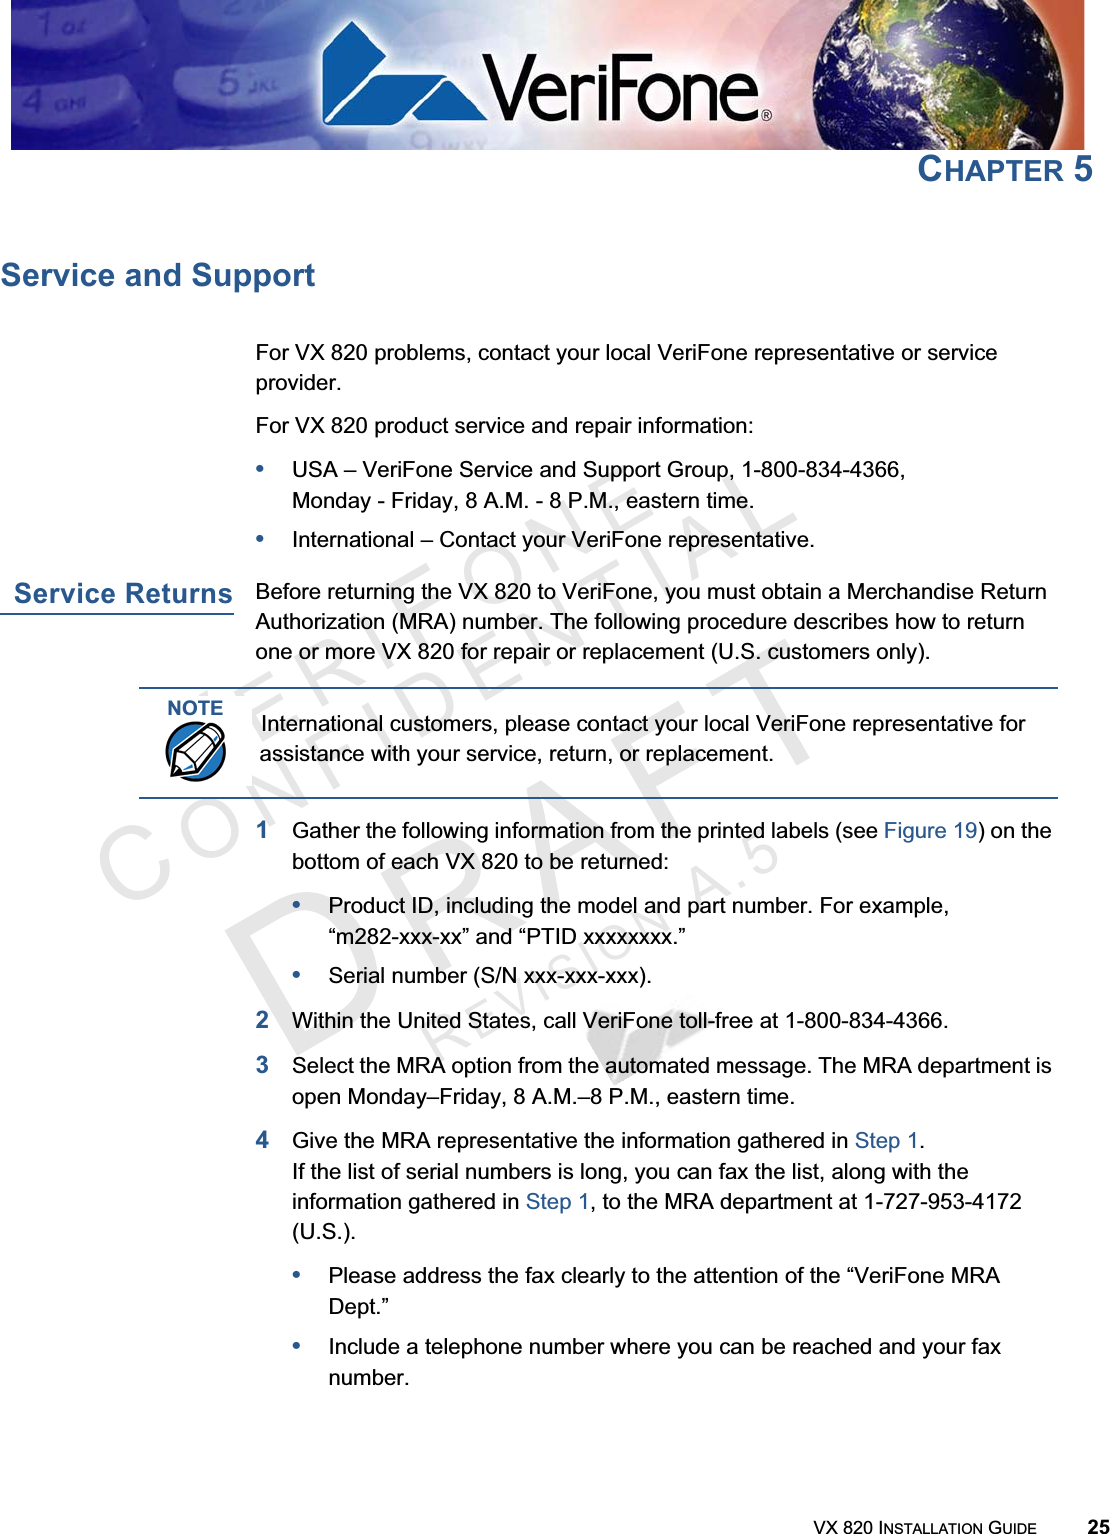 VERIFONECONFIDENTIALREVISIONA.5VX 820 INSTALLATION GUIDE 25CHAPTER 5Service and SupportFor VX 820 problems, contact your local VeriFone representative or service provider.For VX 820 product service and repair information:•USA – VeriFone Service and Support Group, 1-800-834-4366, Monday - Friday, 8 A.M. - 8 P.M., eastern time.•International – Contact your VeriFone representative.Service ReturnsBefore returning the VX 820 to VeriFone, you must obtain a Merchandise Return Authorization (MRA) number. The following procedure describes how to return one or more VX 820 for repair or replacement (U.S. customers only).1Gather the following information from the printed labels (see Figure 19) on the bottom of each VX 820 to be returned:•Product ID, including the model and part number. For example,“m282-xxx-xx” and “PTID xxxxxxxx.”•Serial number (S/N xxx-xxx-xxx).2Within the United States, call VeriFone toll-free at 1-800-834-4366.3Select the MRA option from the automated message. The MRA department is open Monday–Friday, 8 A.M.–8 P.M., eastern time.4Give the MRA representative the information gathered in Step 1.If the list of serial numbers is long, you can fax the list, along with the information gathered in Step 1, to the MRA department at 1-727-953-4172 (U.S.).•Please address the fax clearly to the attention of the “VeriFone MRA Dept.”•Include a telephone number where you can be reached and your fax number.NOTEInternational customers, please contact your local VeriFone representative for assistance with your service, return, or replacement.